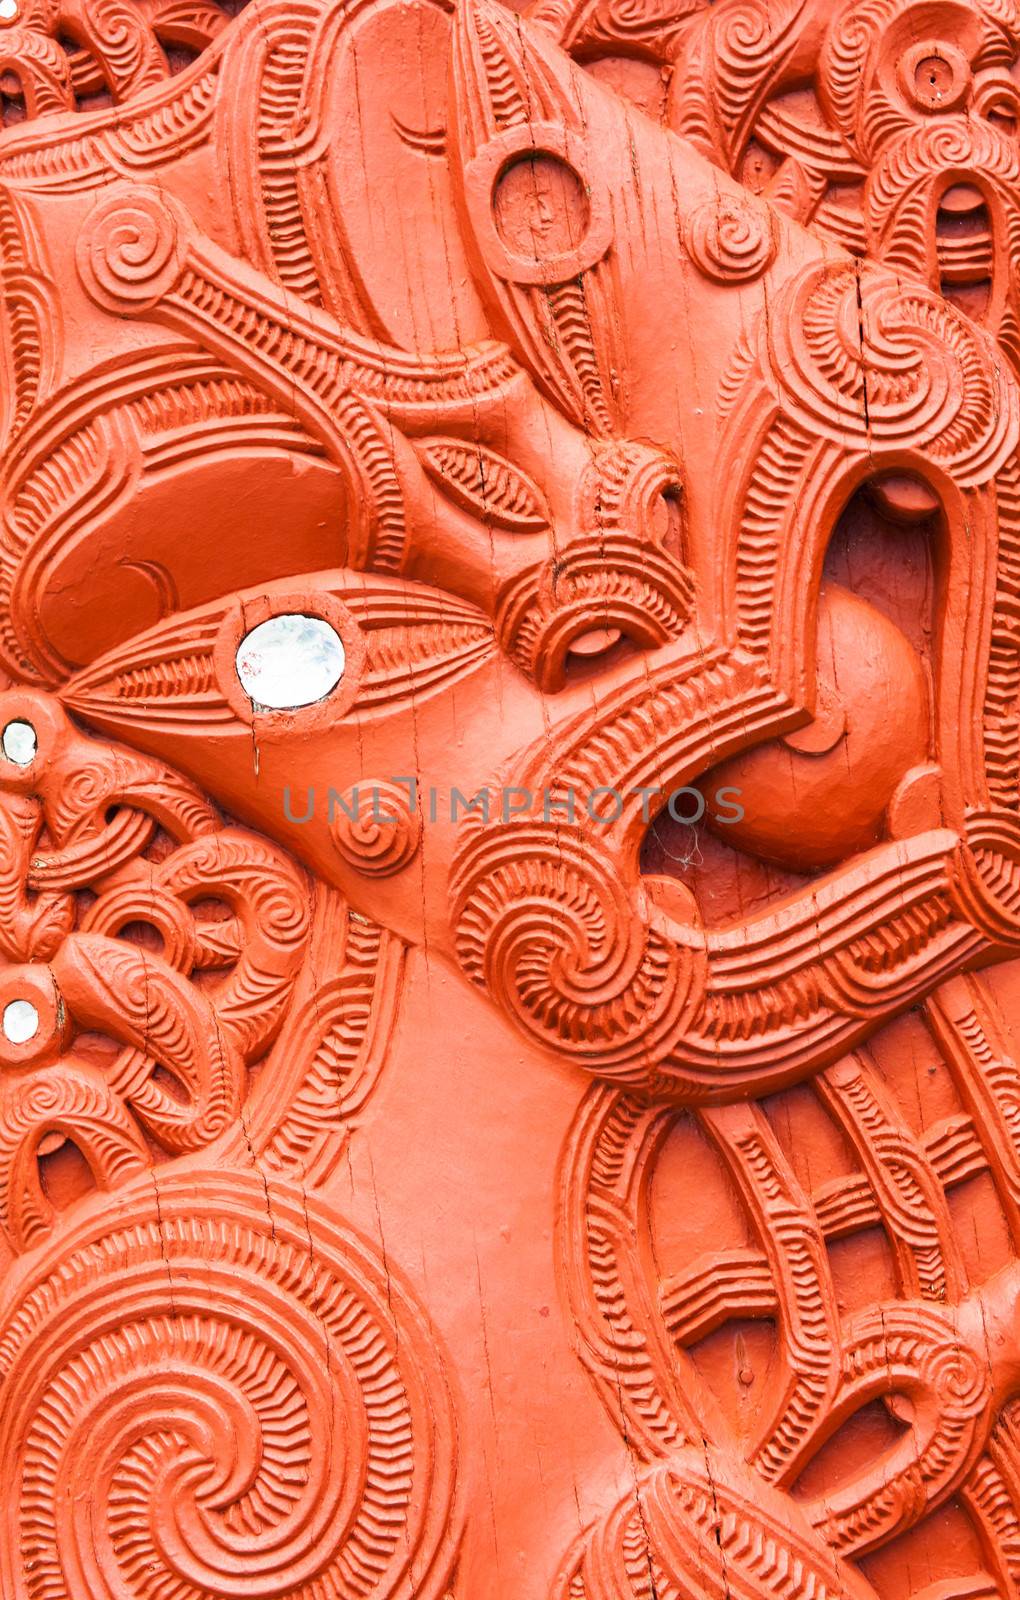 Maori Carving by fyletto